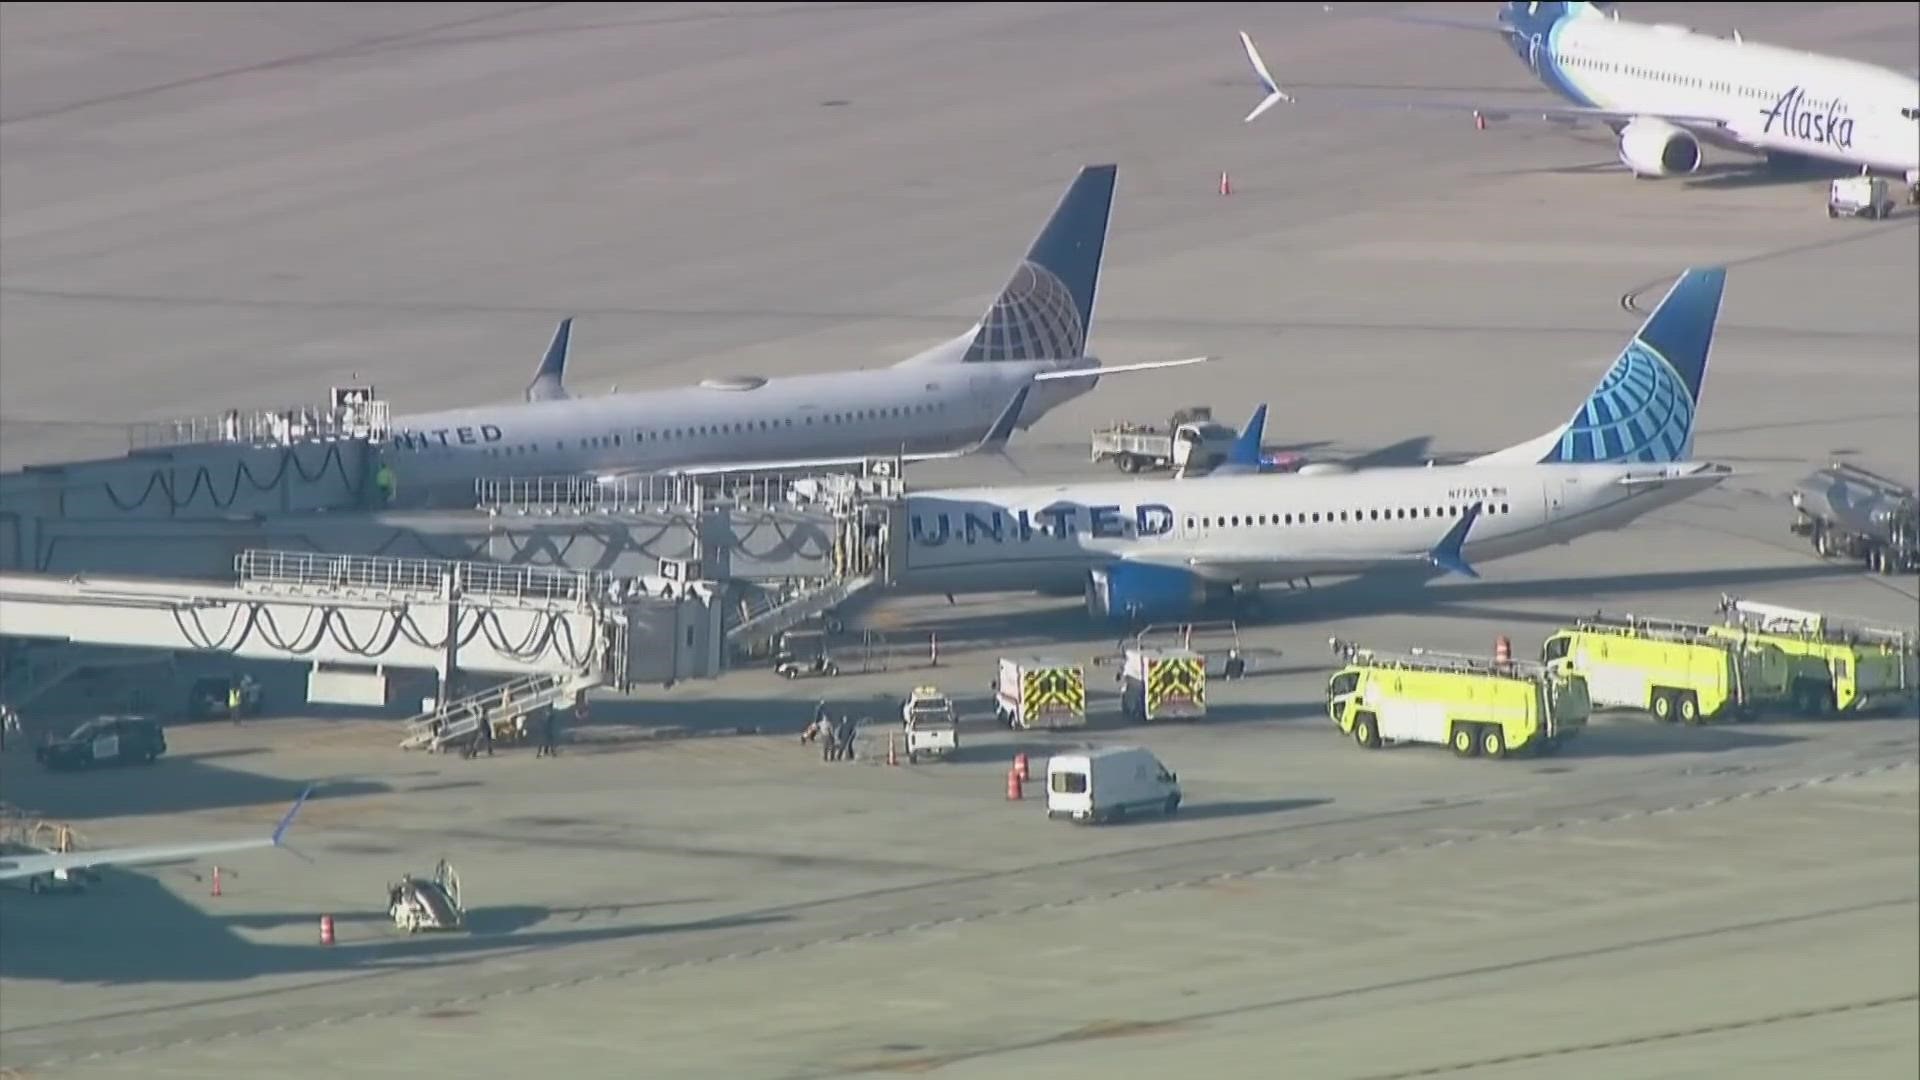 A United Airlines flight that took off from San Diego Tuesday morning returned to the airport for an emergency landing after an external battery pack caught fire.